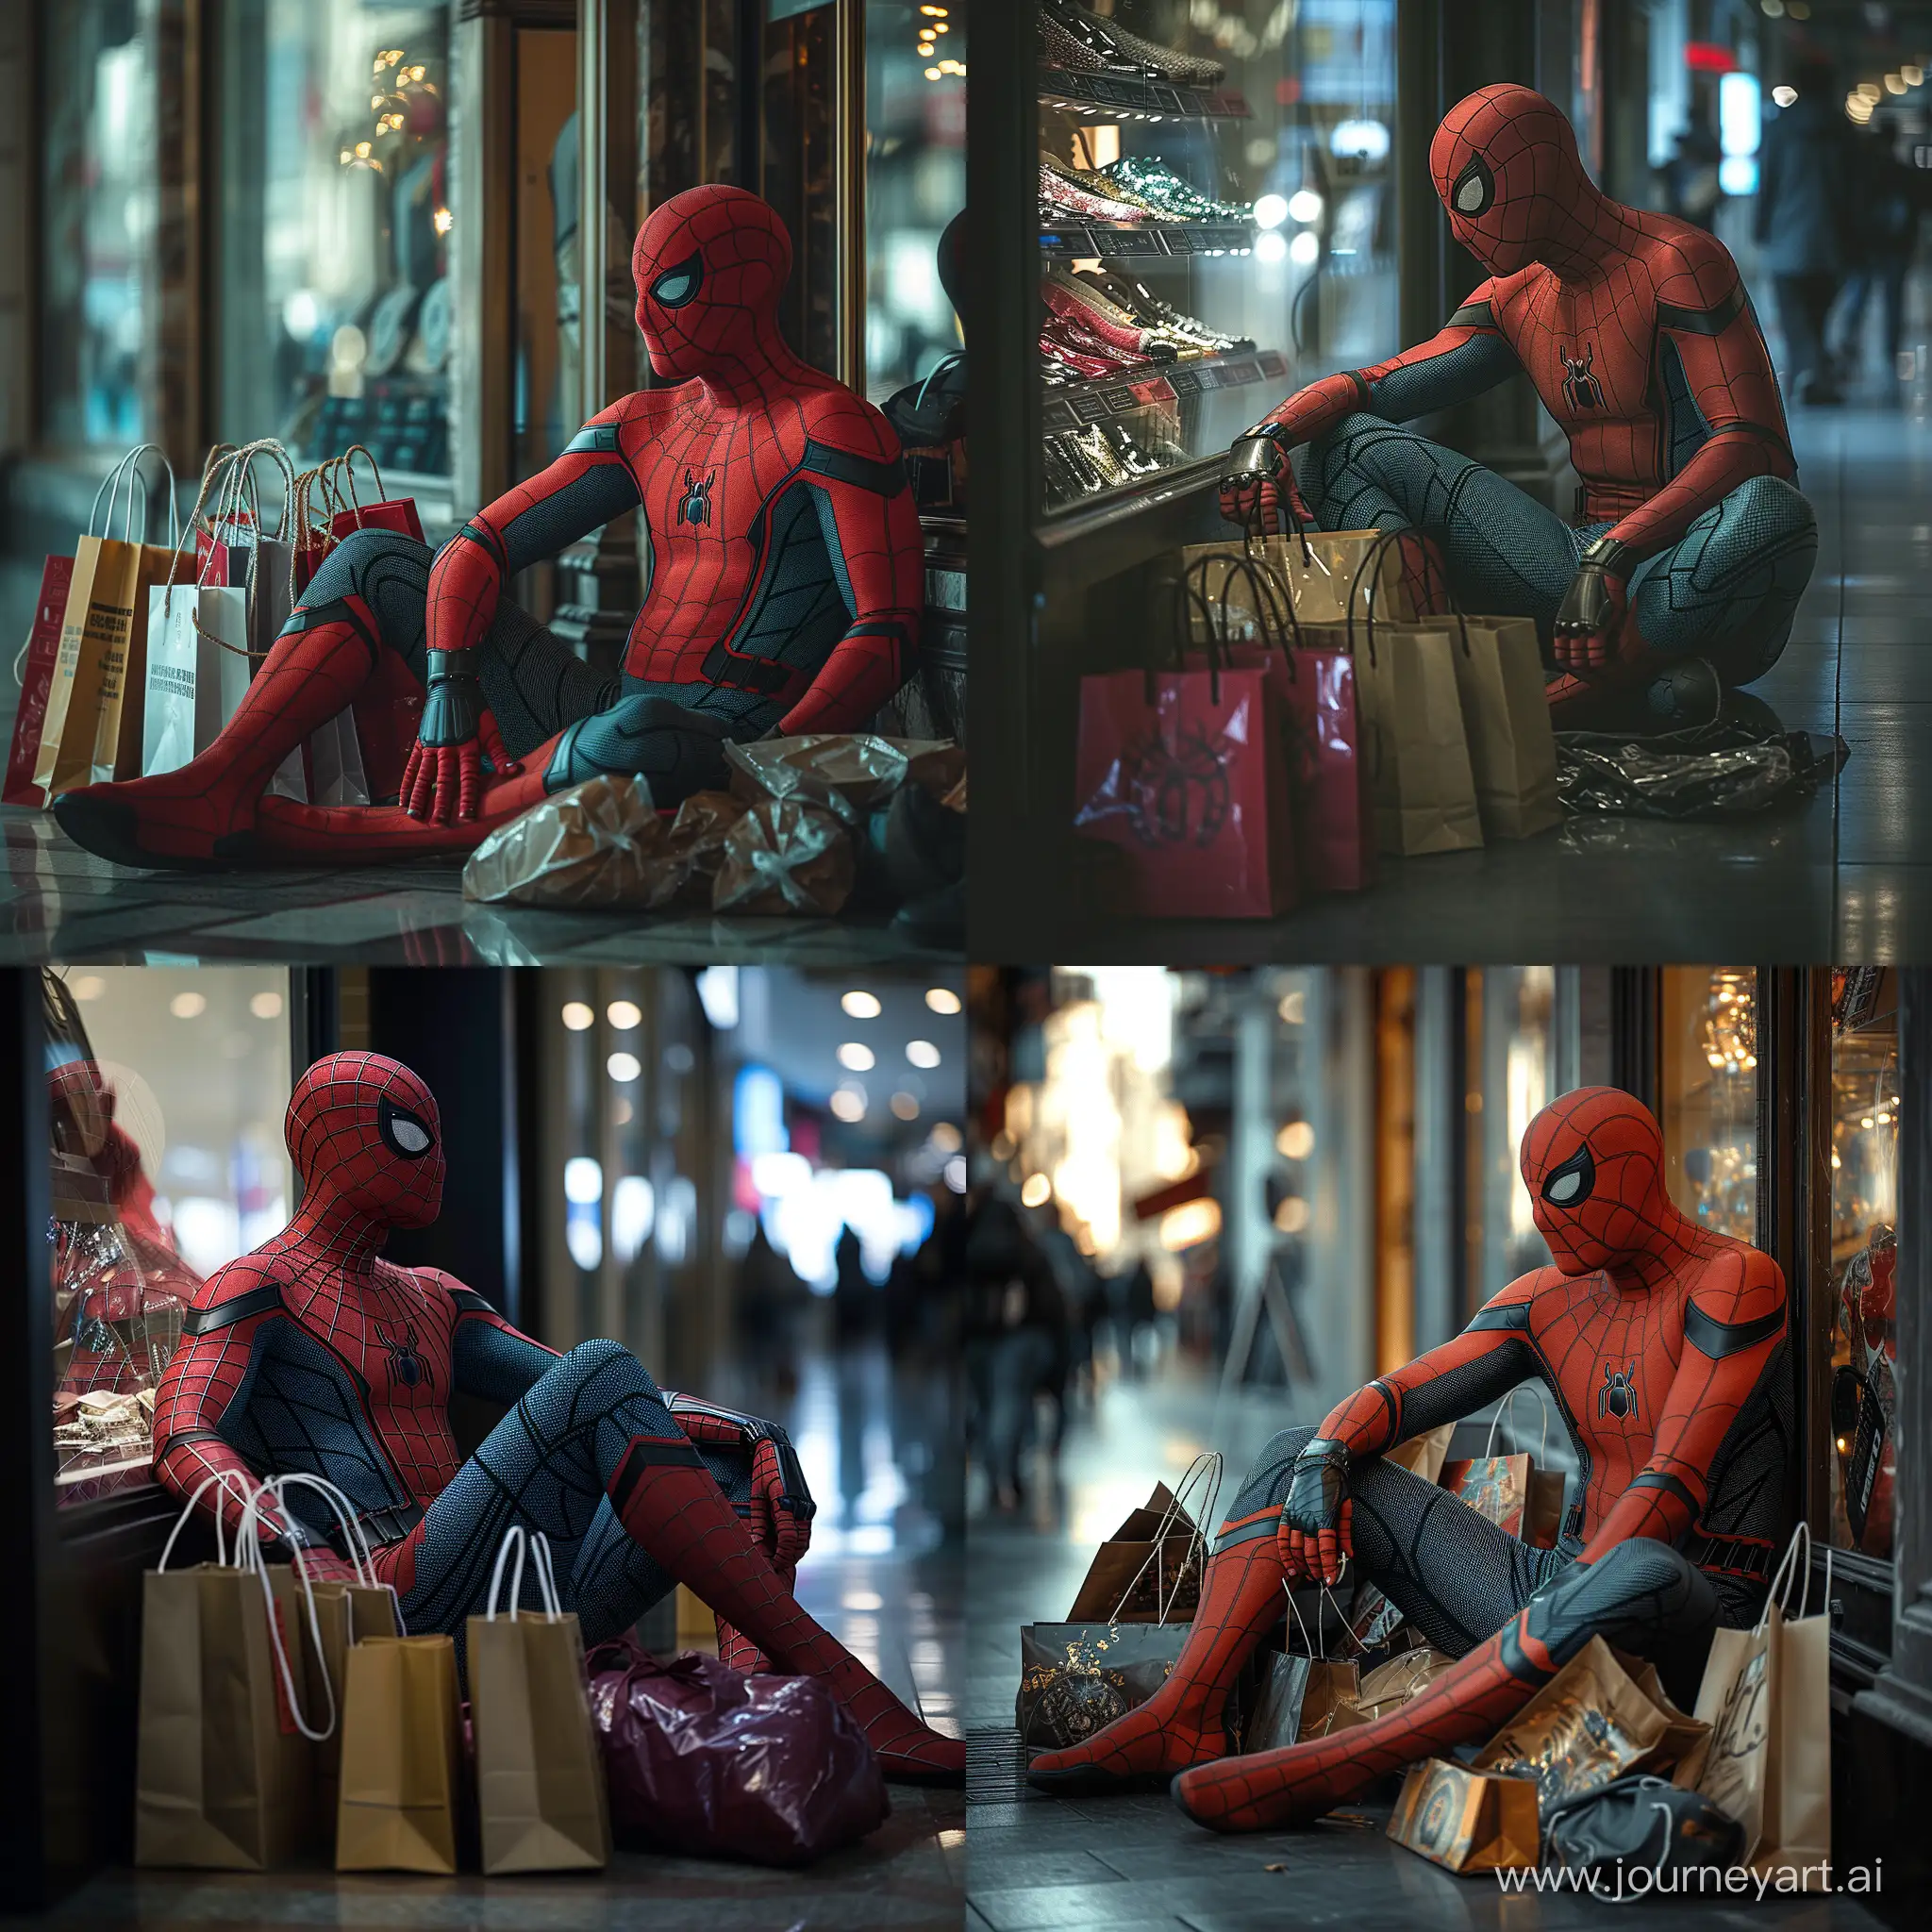 SpiderMan-Resting-After-Shopping-Spree-at-Mall-Display-Window